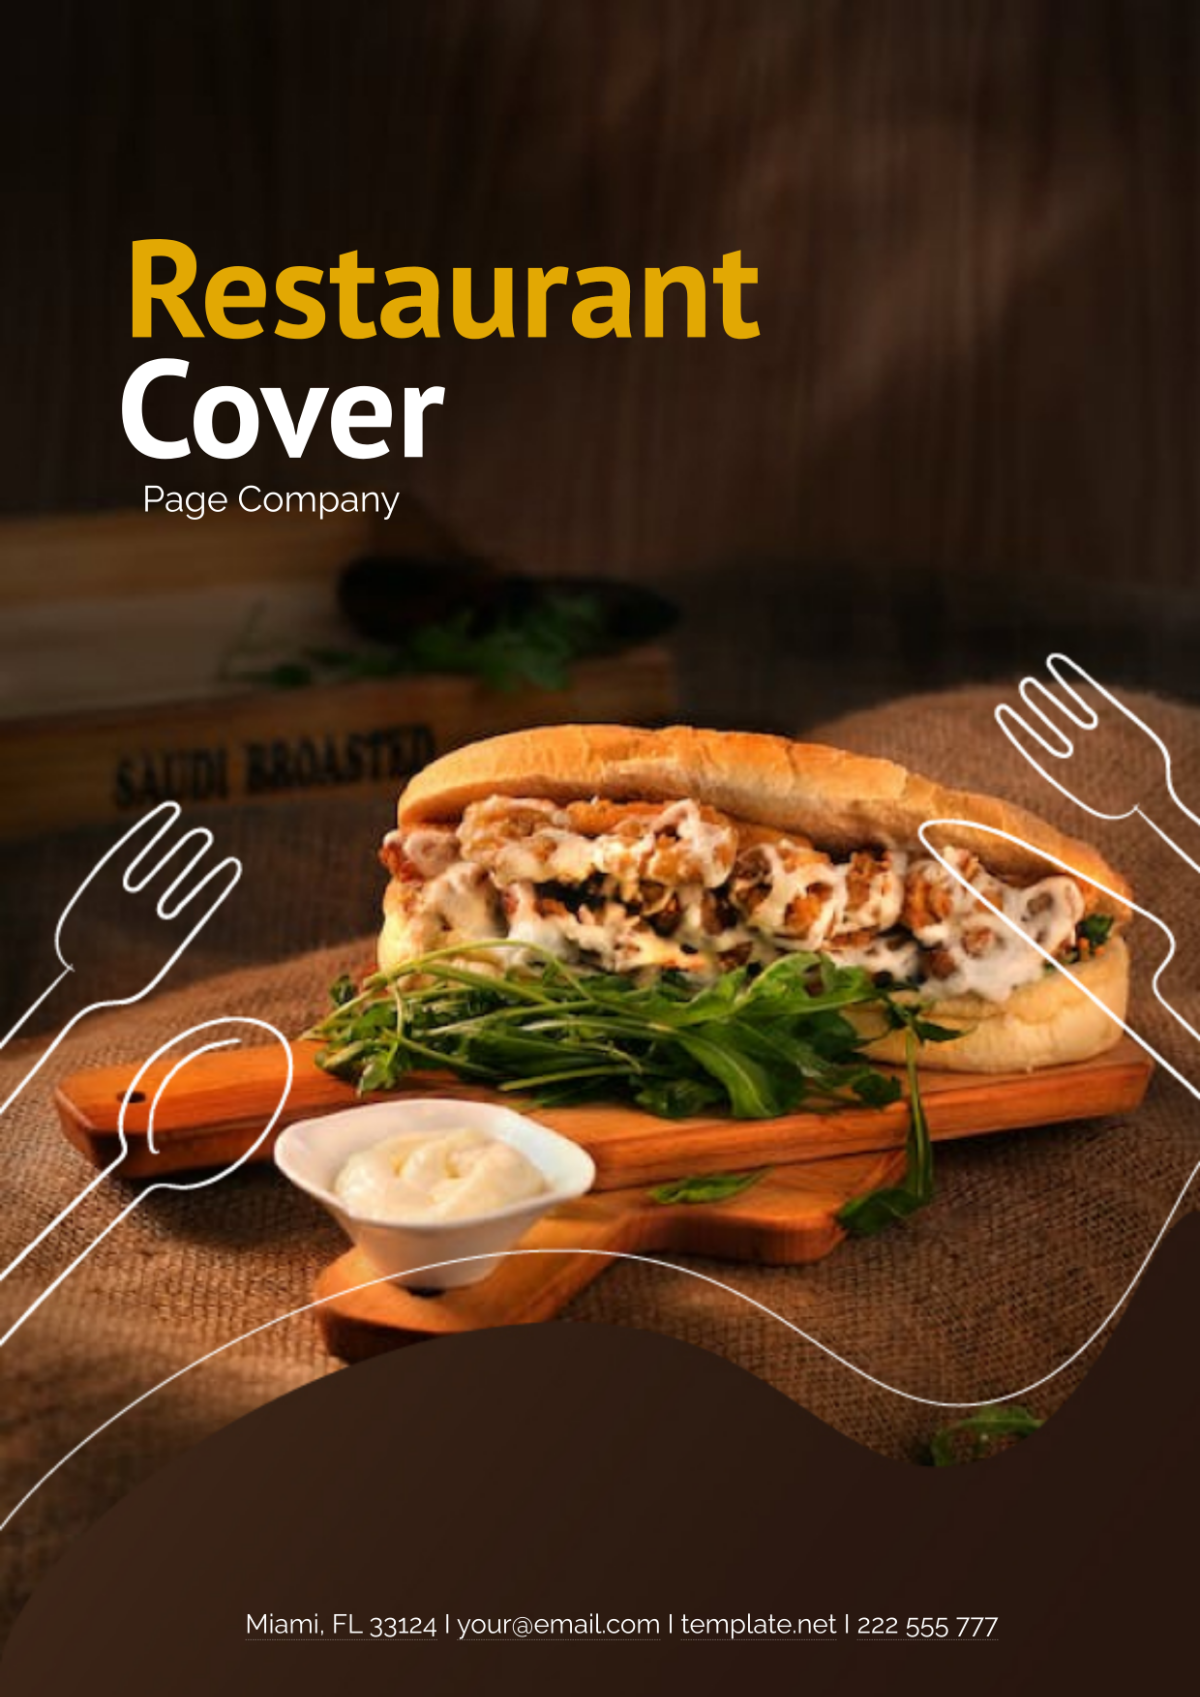 Restaurant Cover Page Company Template